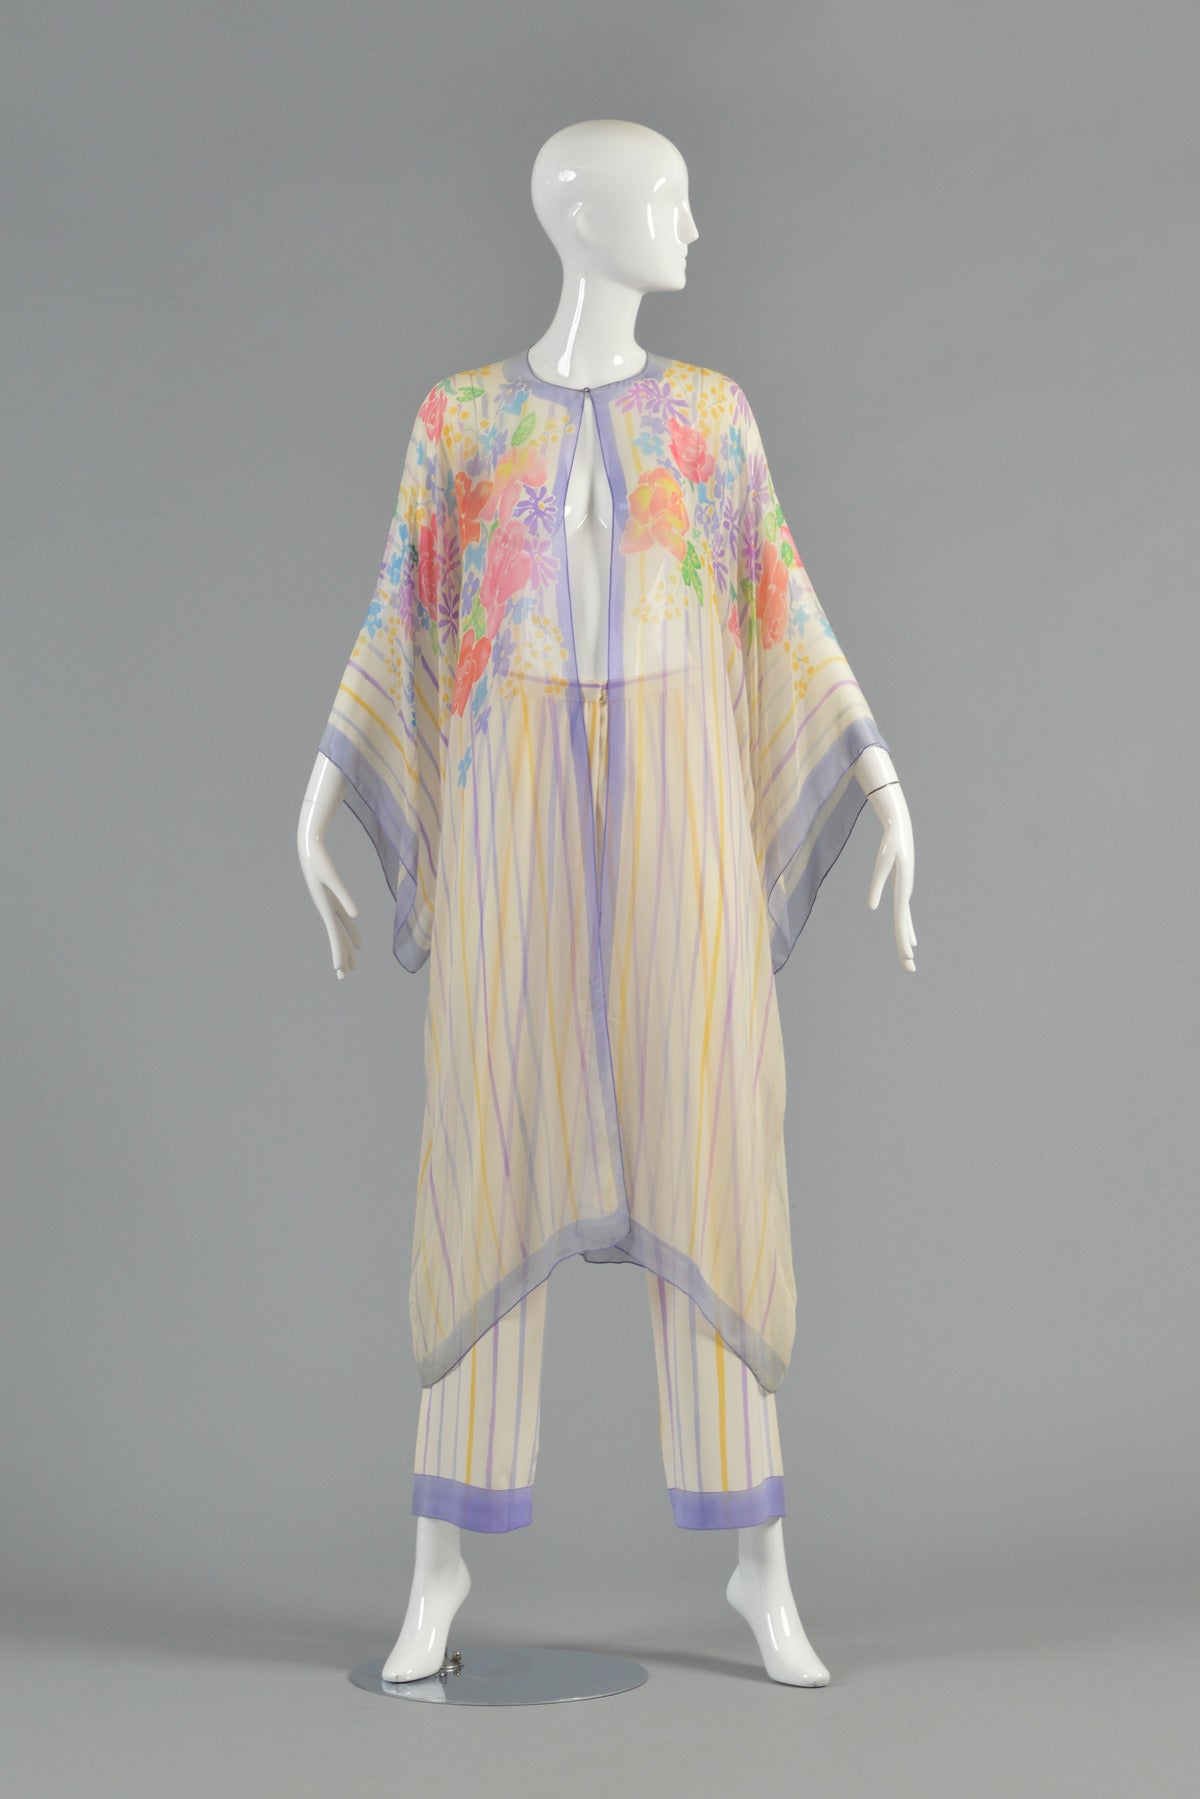 Exquisite Oscar de la Renta Hand Painted Silk Kimono Ensemble. Includes high-waisted, wide-legged striped silk pants and matching sheer silk, hand-painted kimono jacket. Jacket features wide kimono sleeves, hand-painted stripes amidst a bouquet of